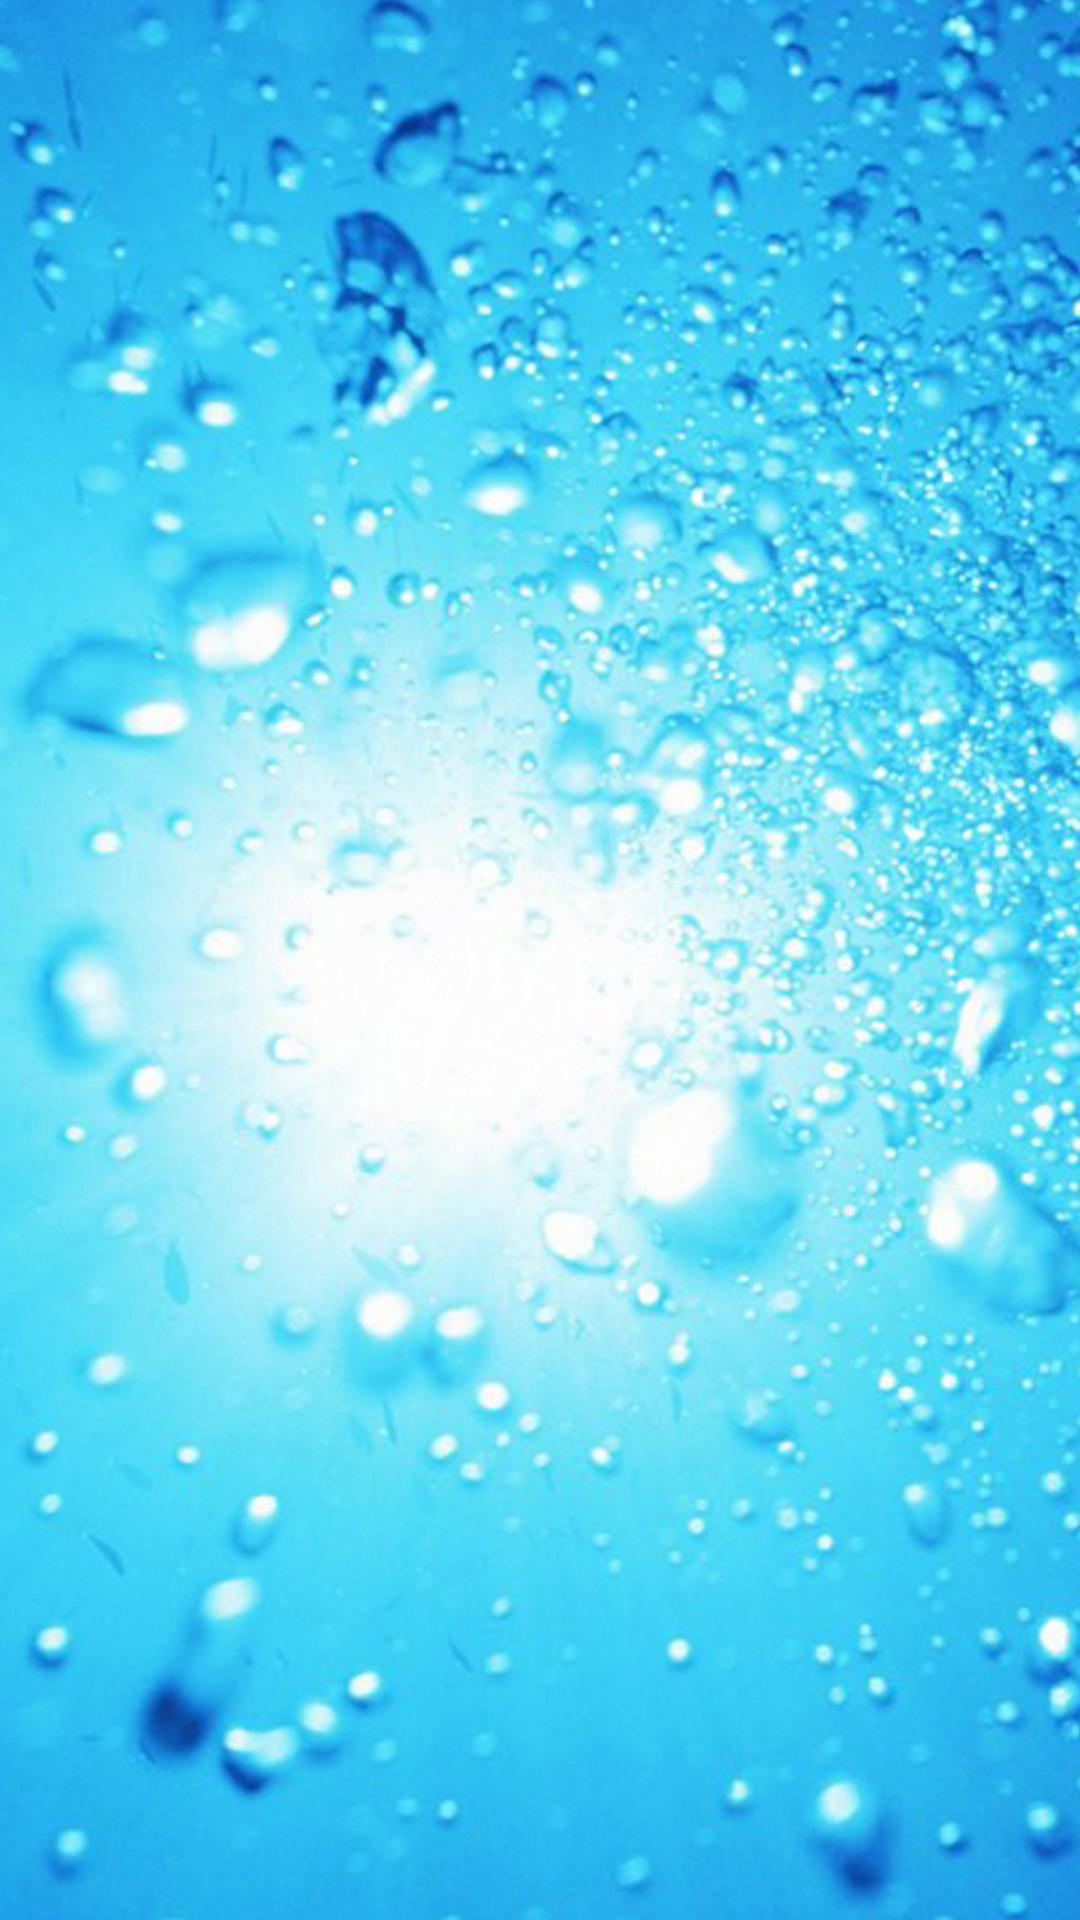 Light blue water droplets Samsung Galaxy Note 3 Wallpapers